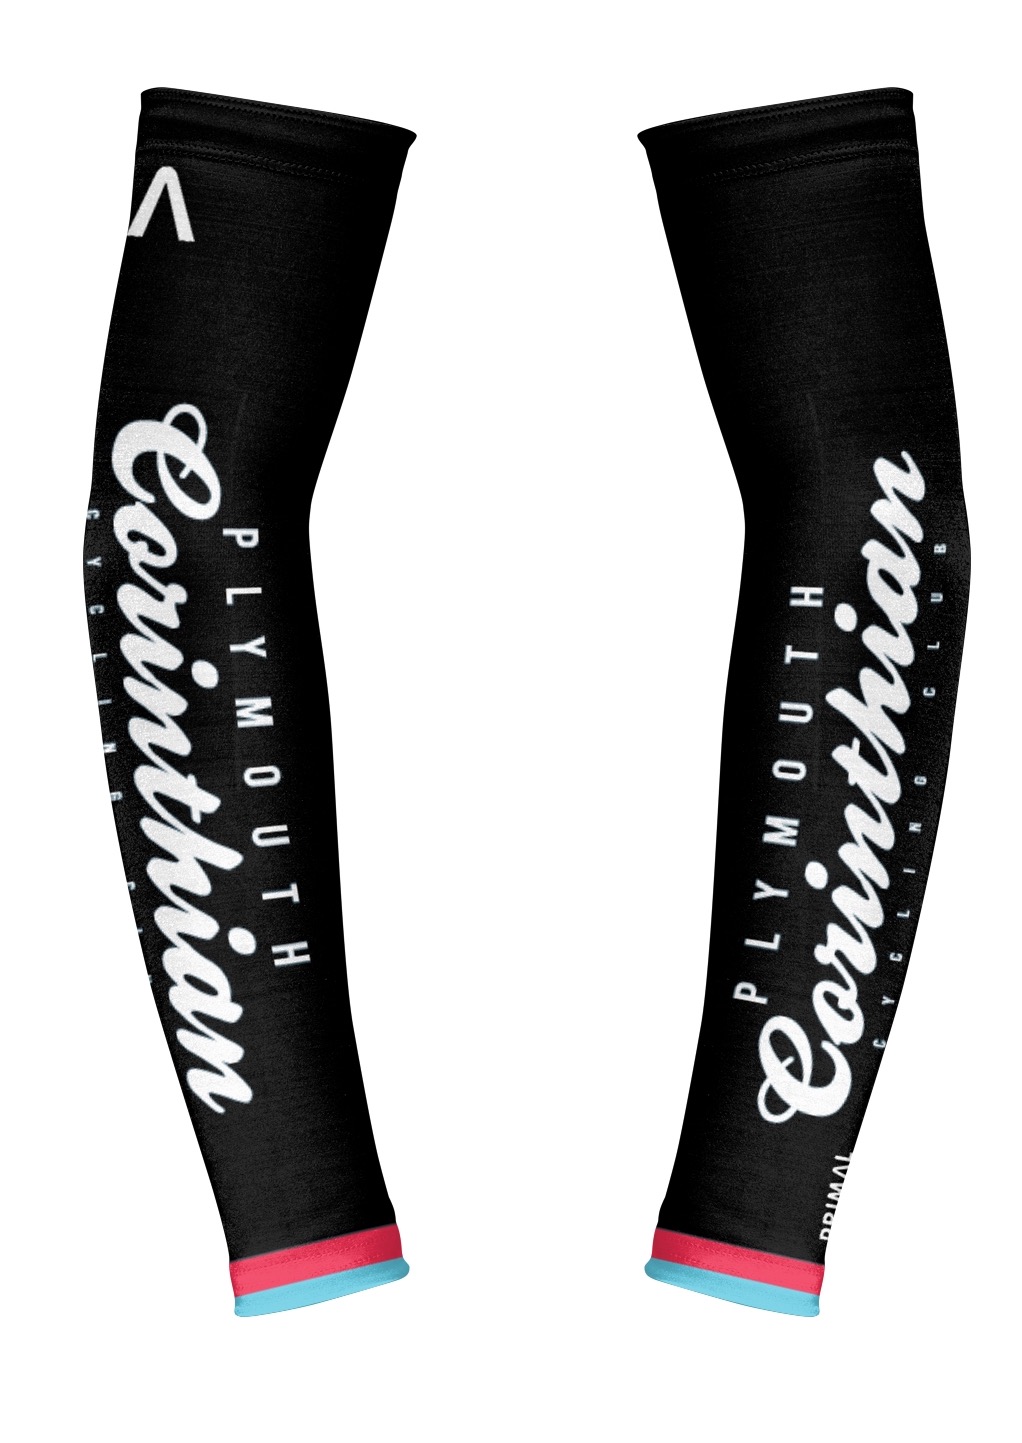 PCCC Arm Warmers